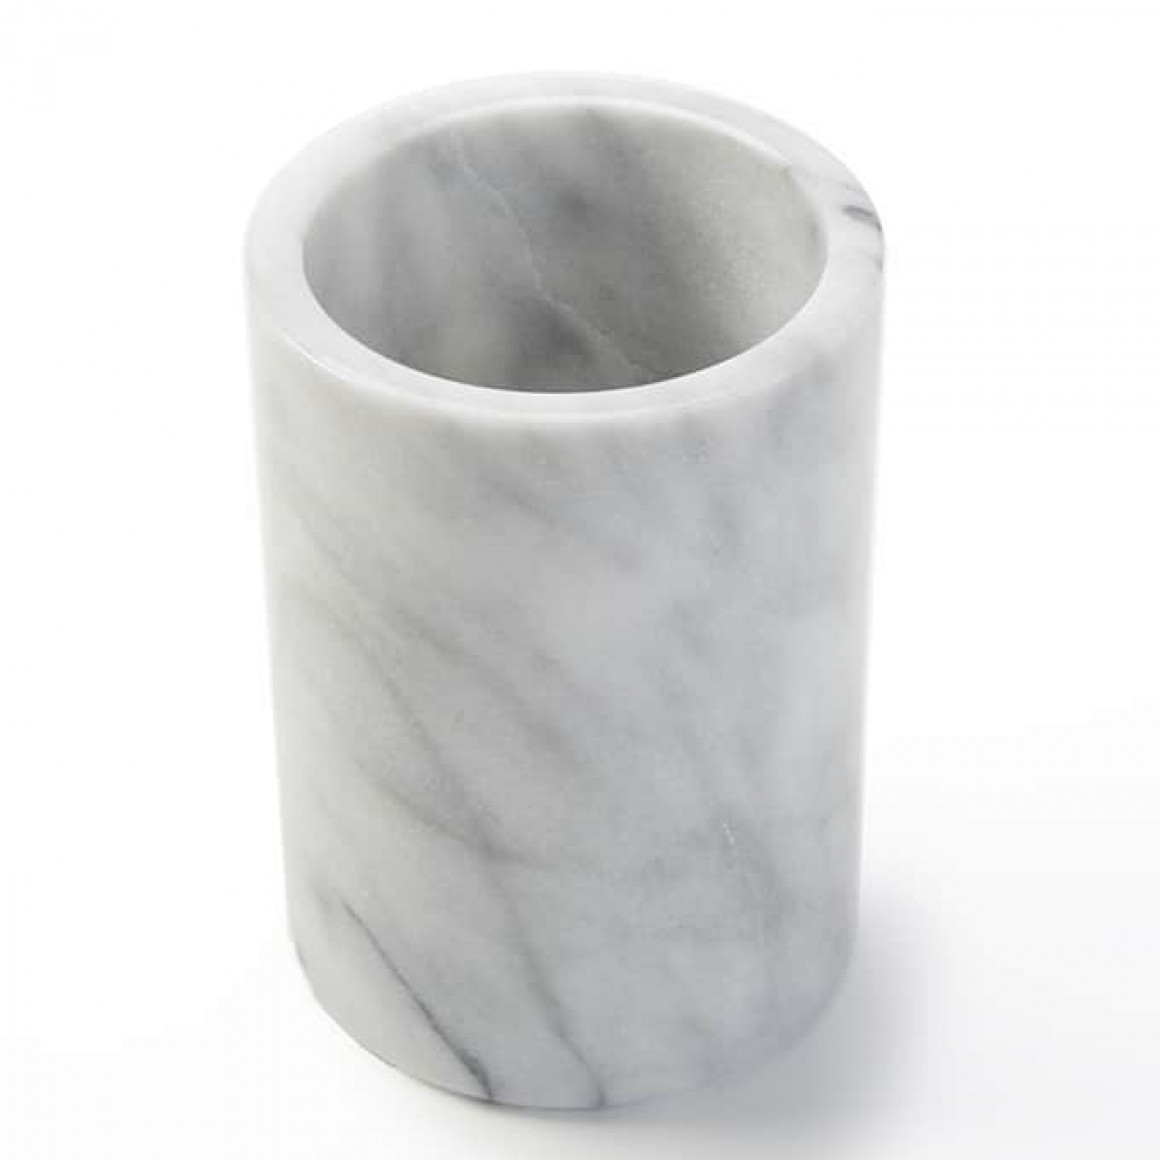 WINE COOLER, MARBLE, WHITE, 7